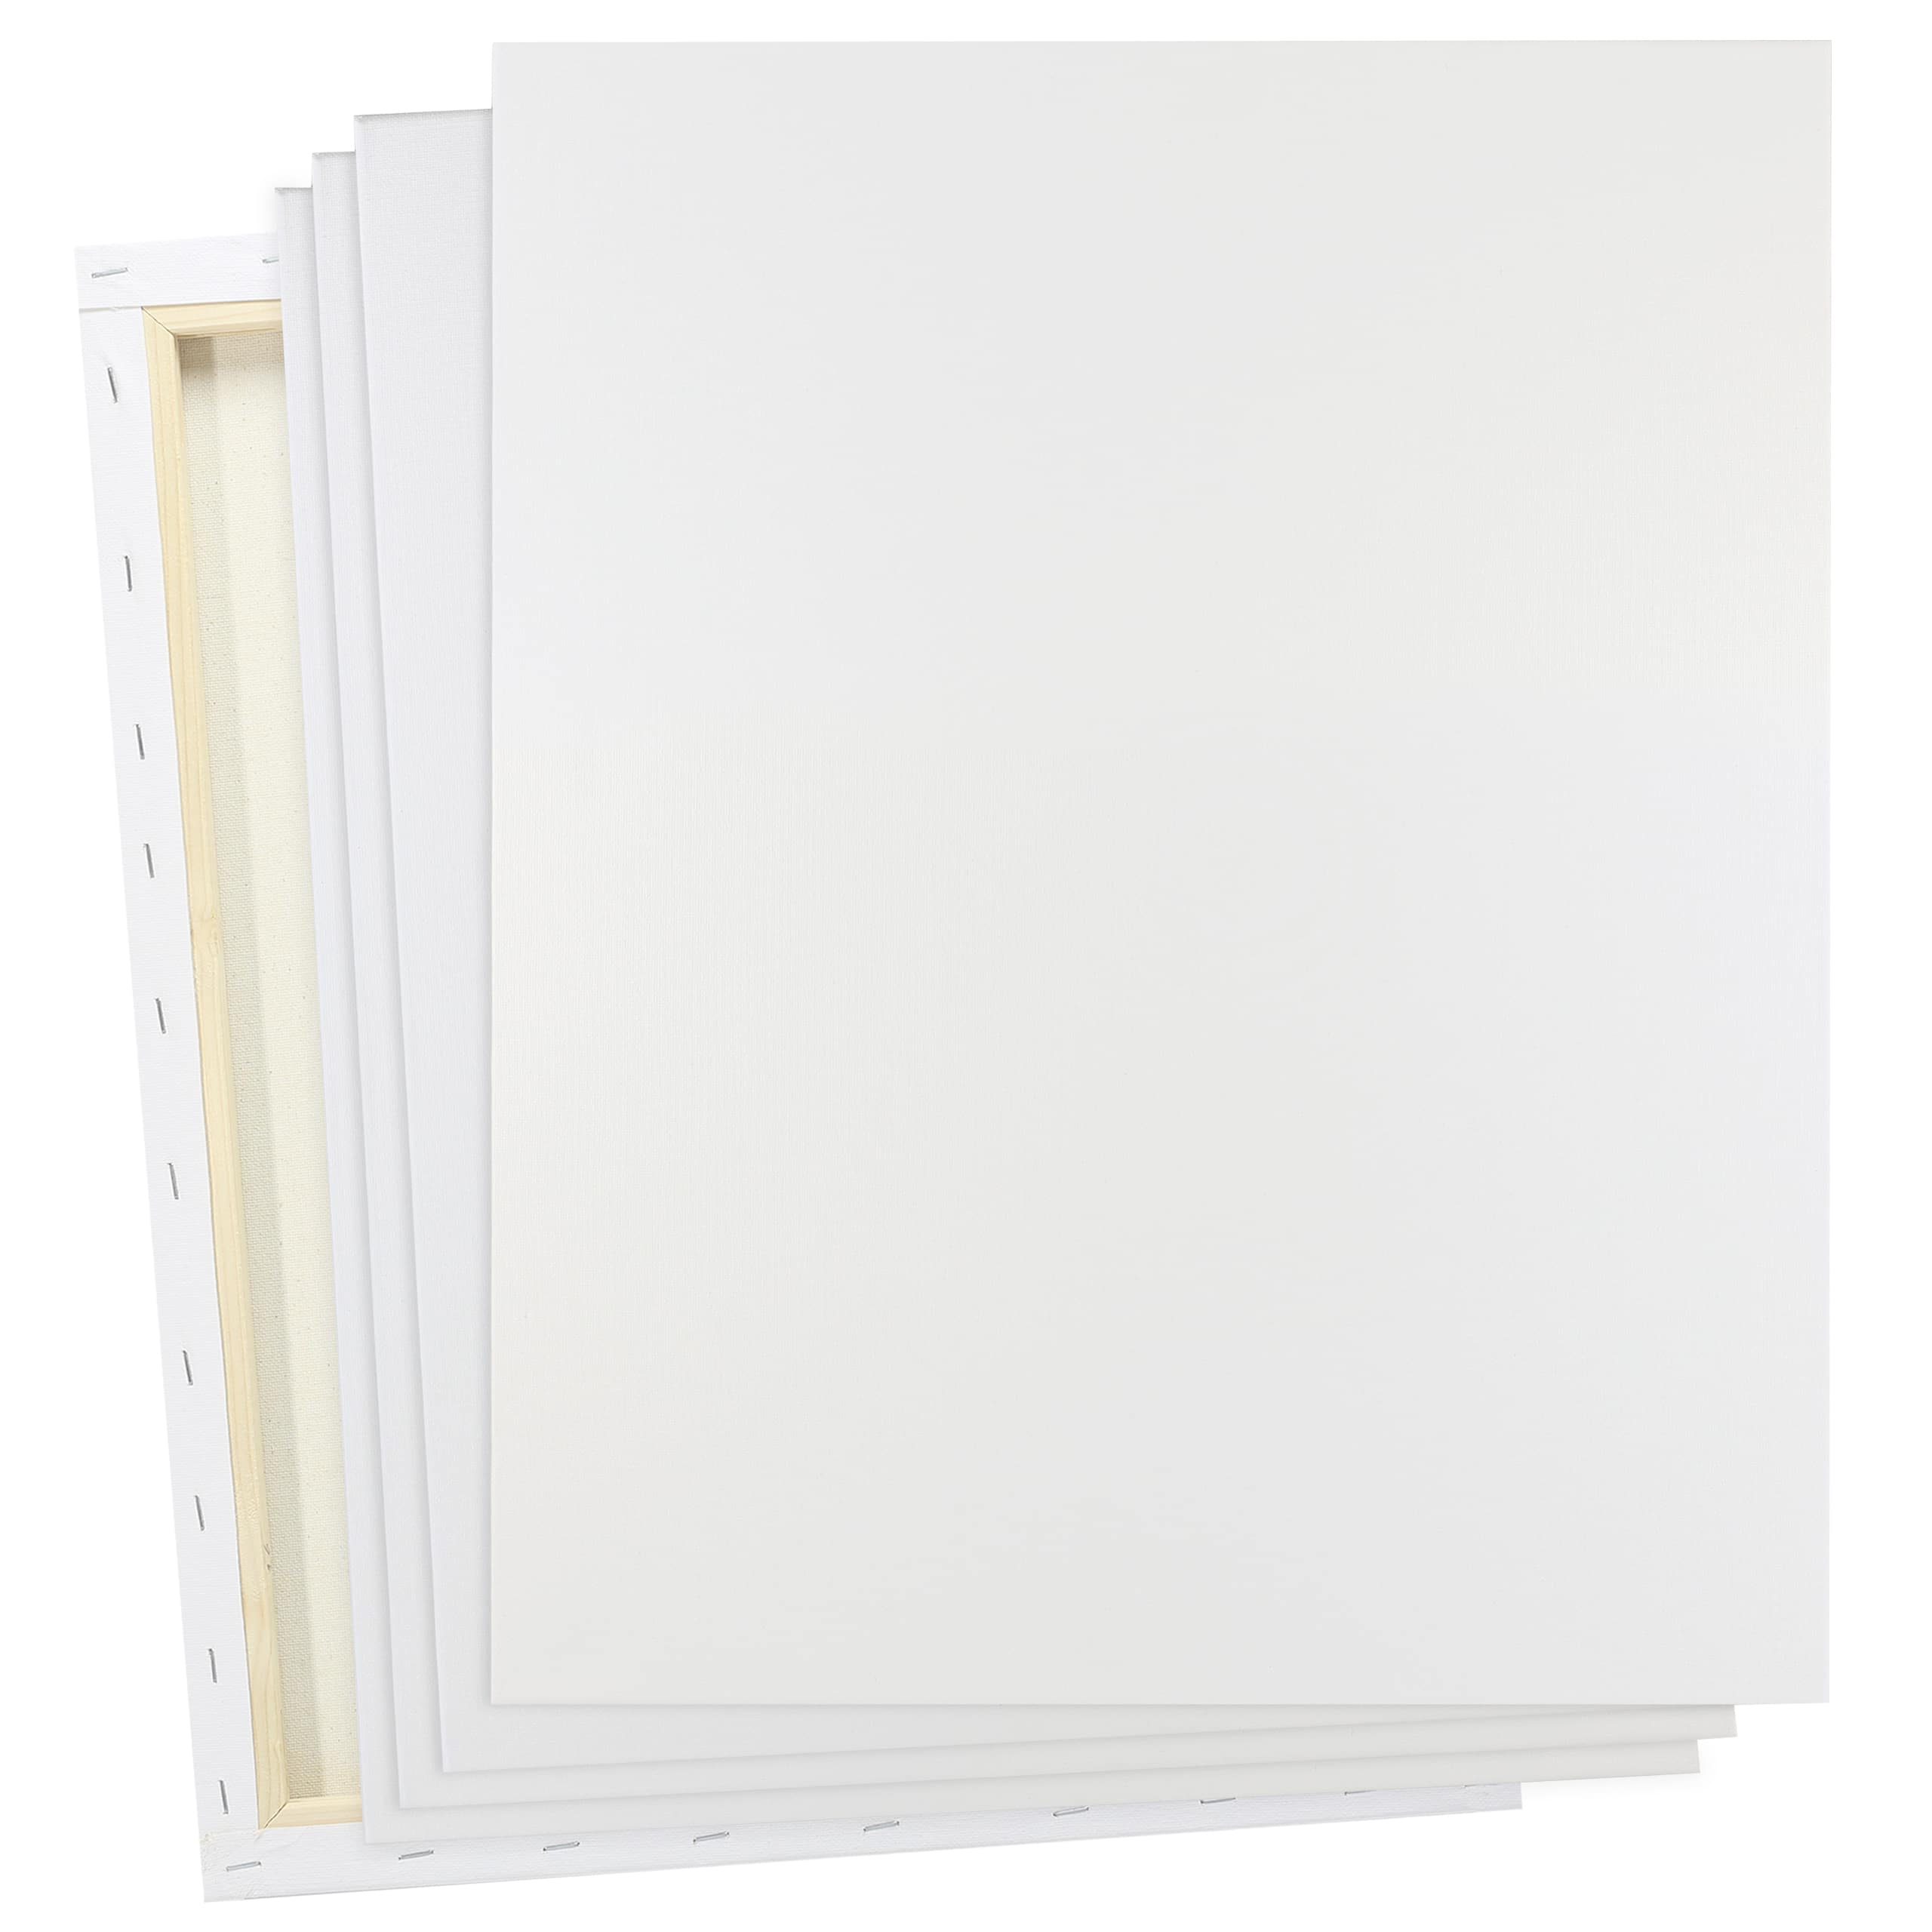 16x20 Canvas Bundle - Pack of 5 Art Canvas Sheets and Magnetic